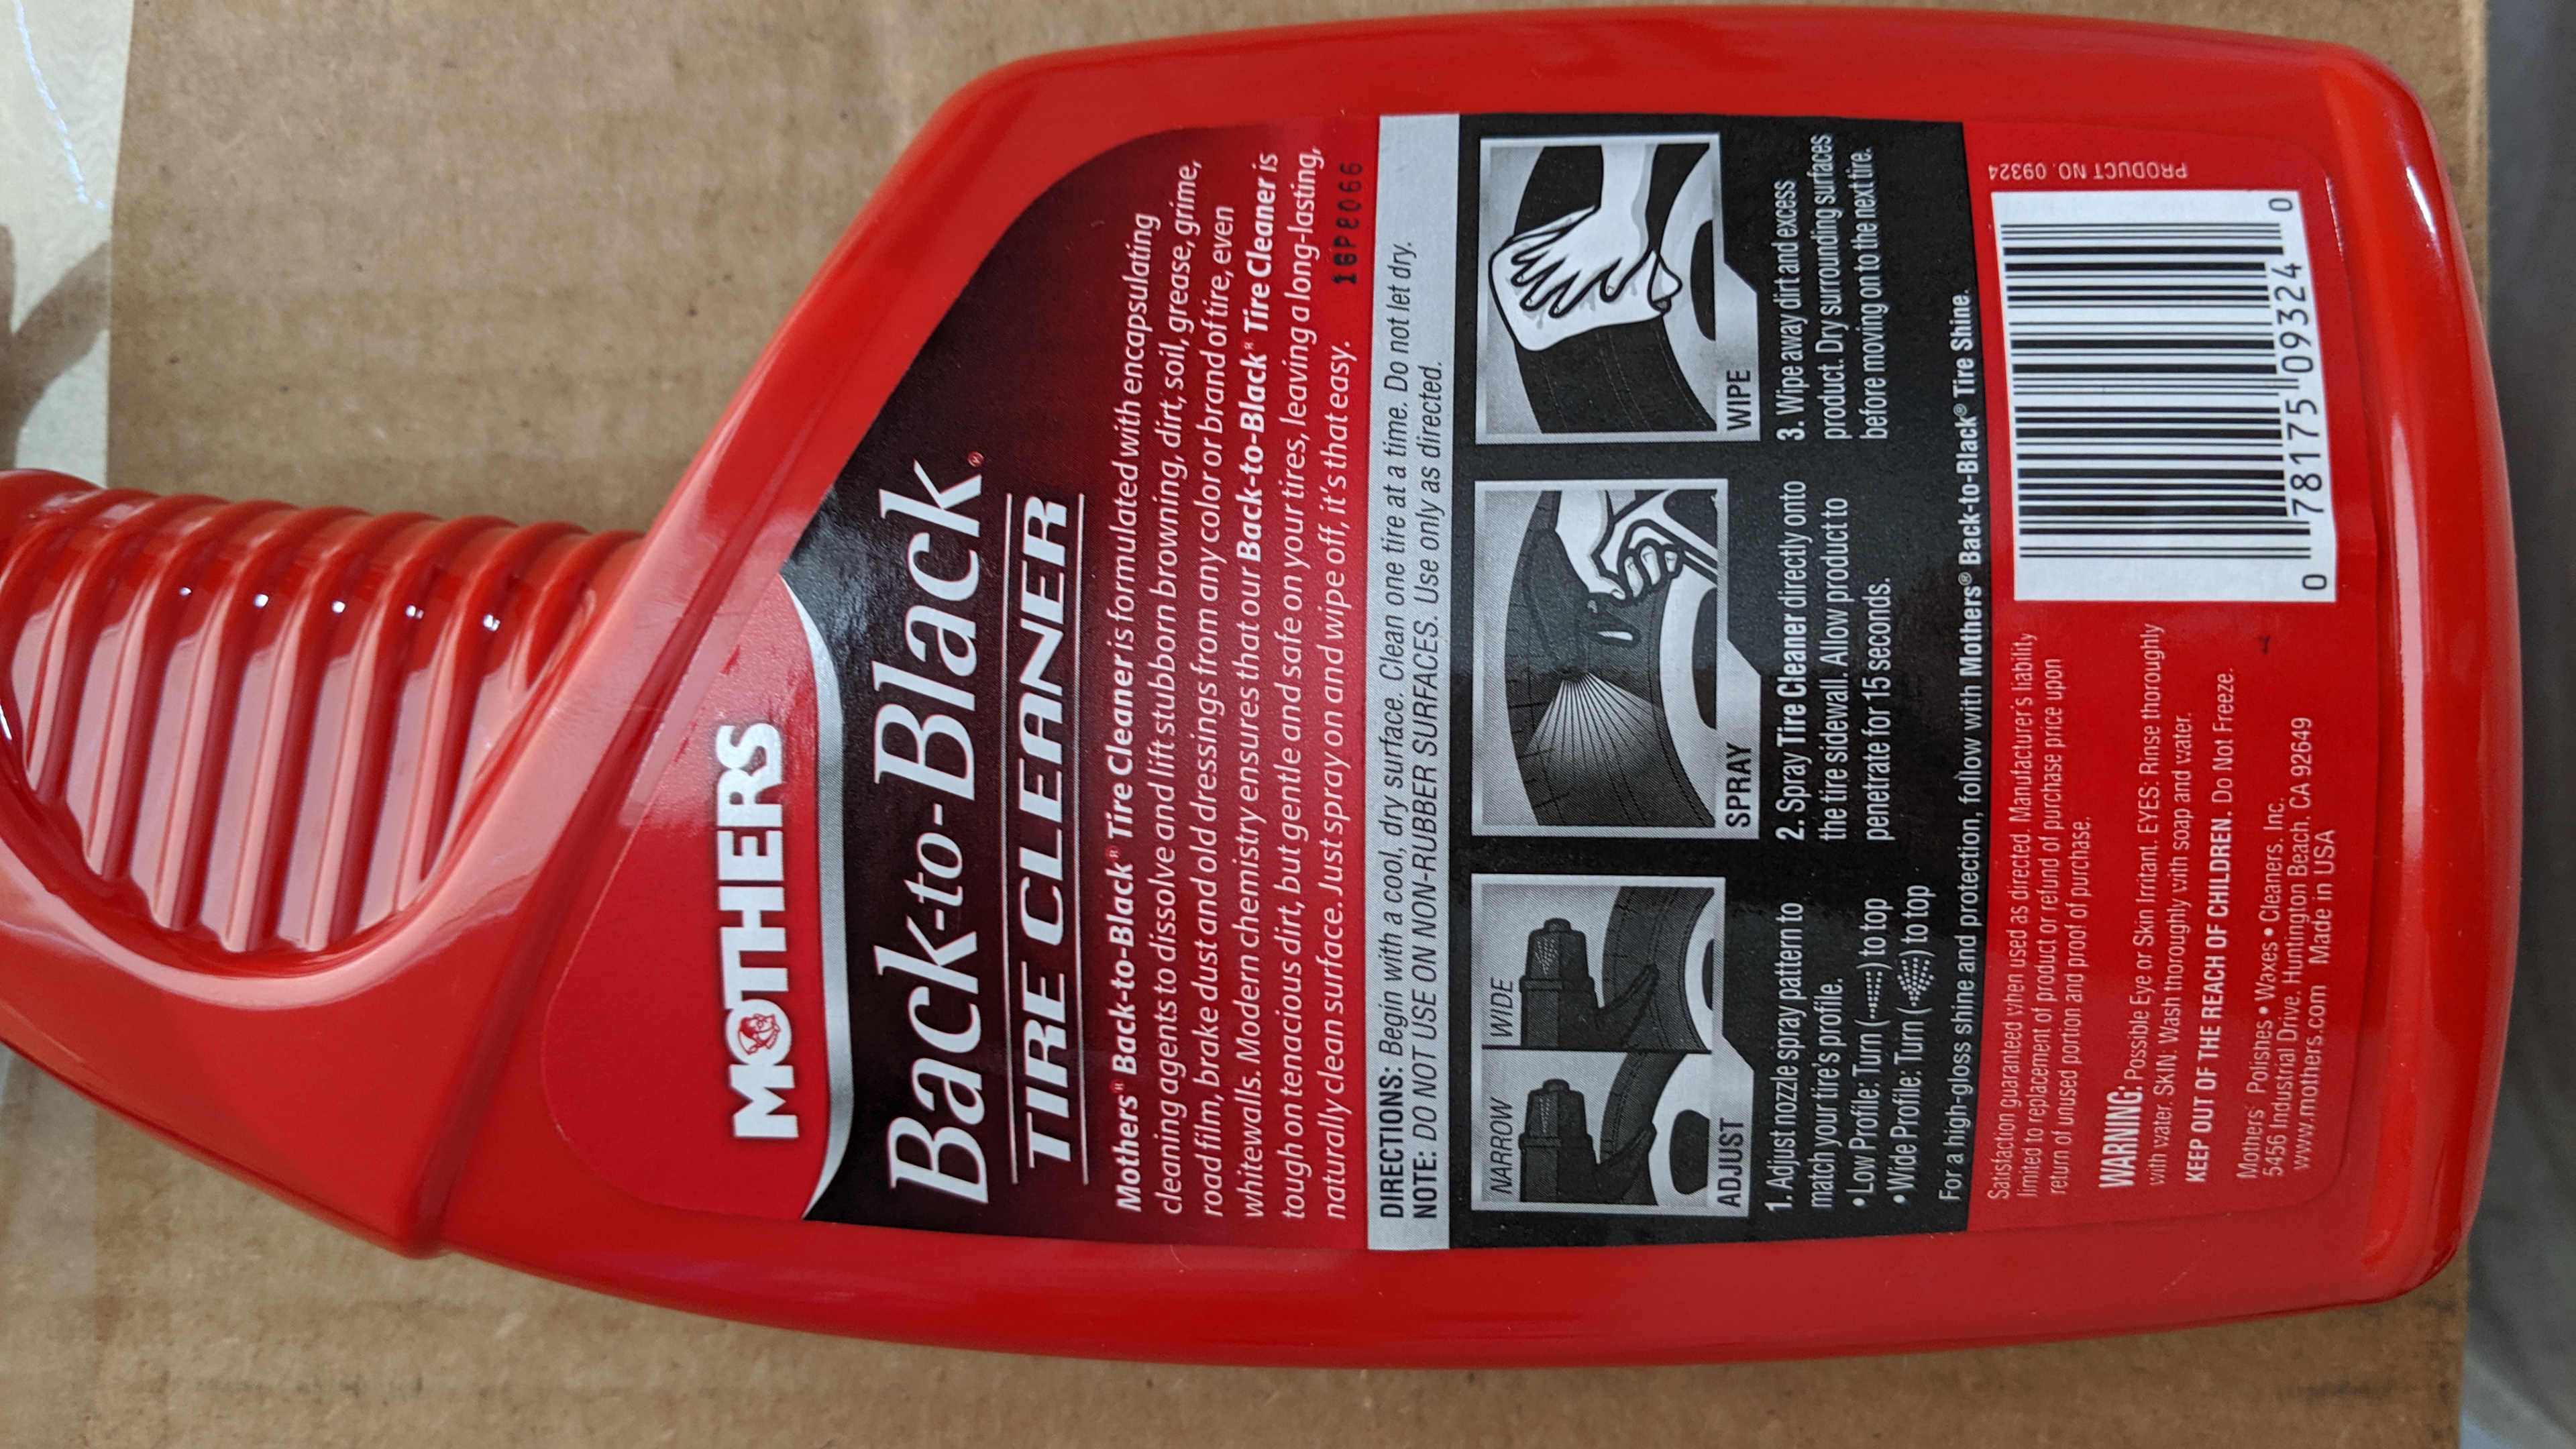 Back-to-Black® Tire Cleaner